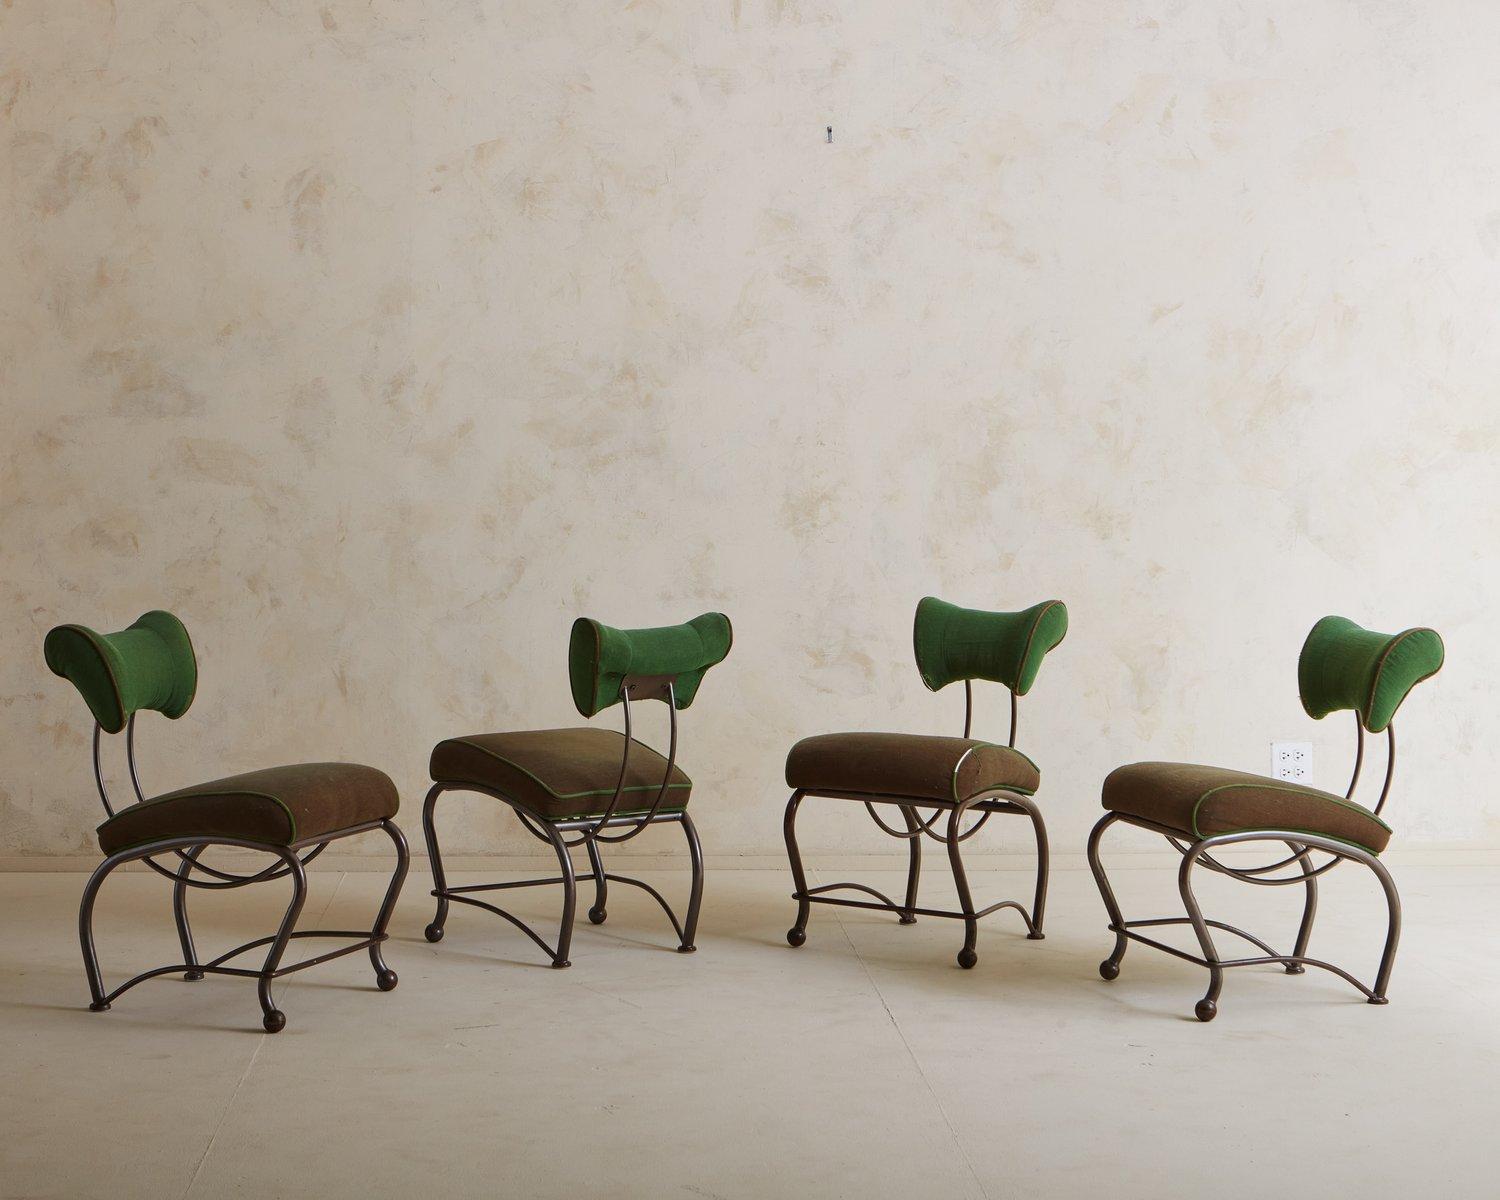 A set of 4 Elbert chairs designed by Jordan Mozer in the 1990s and manufactured by Shelby Williams Industries. These unique chairs have sculptural steel frames with curved, upholstered seats and backs in brown and green fabric with contrasting welt